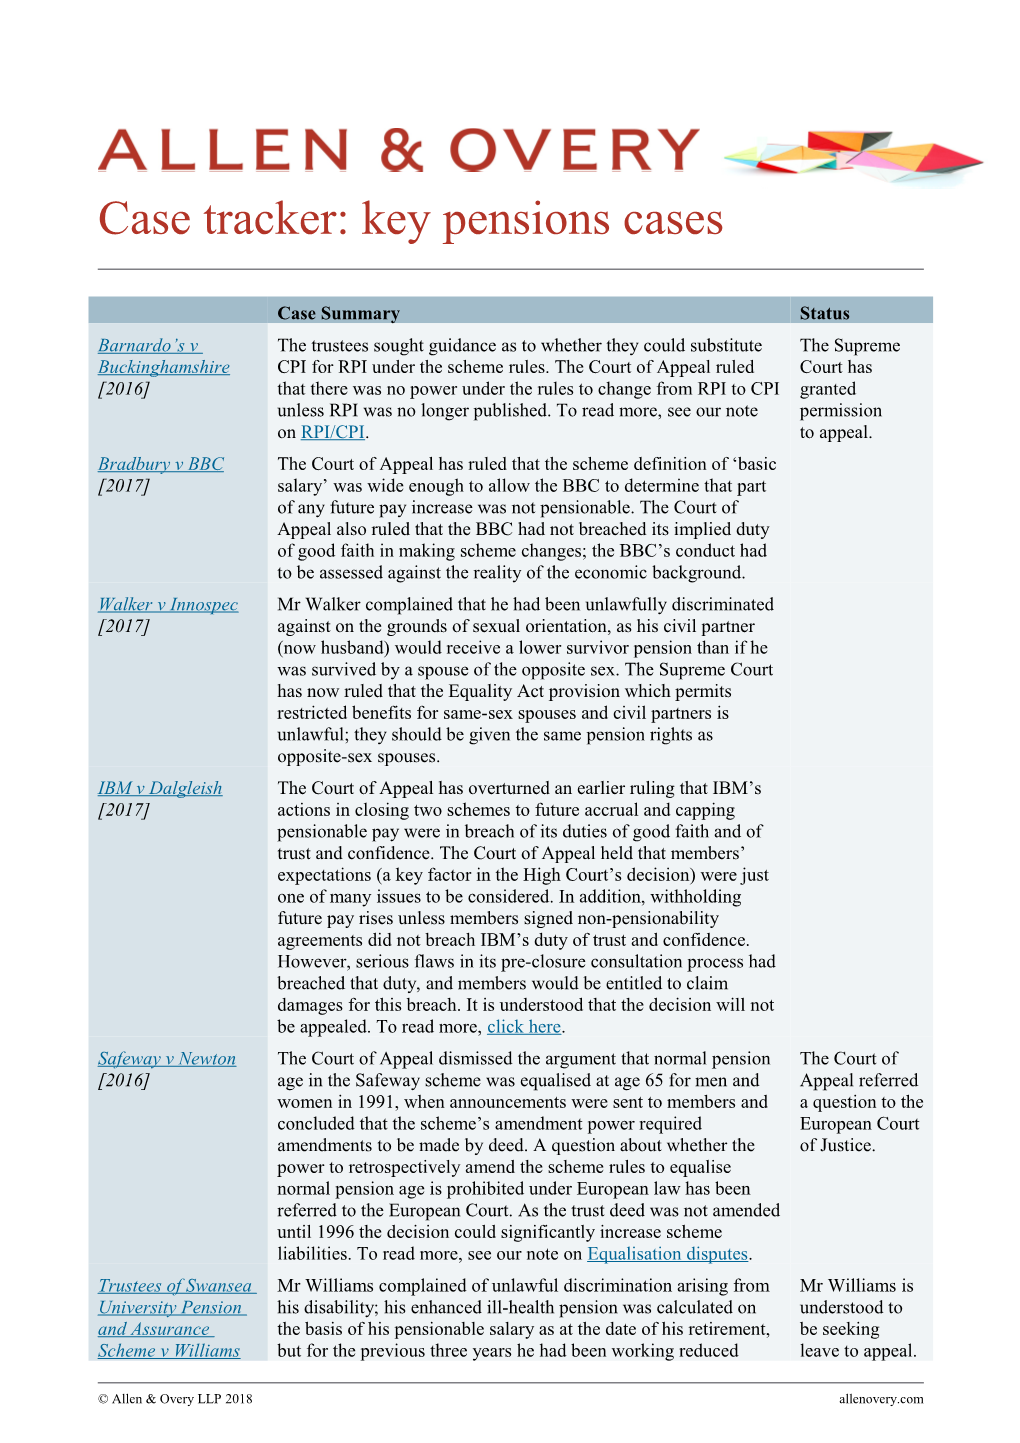 Case Tracker: Key Pensions Cases